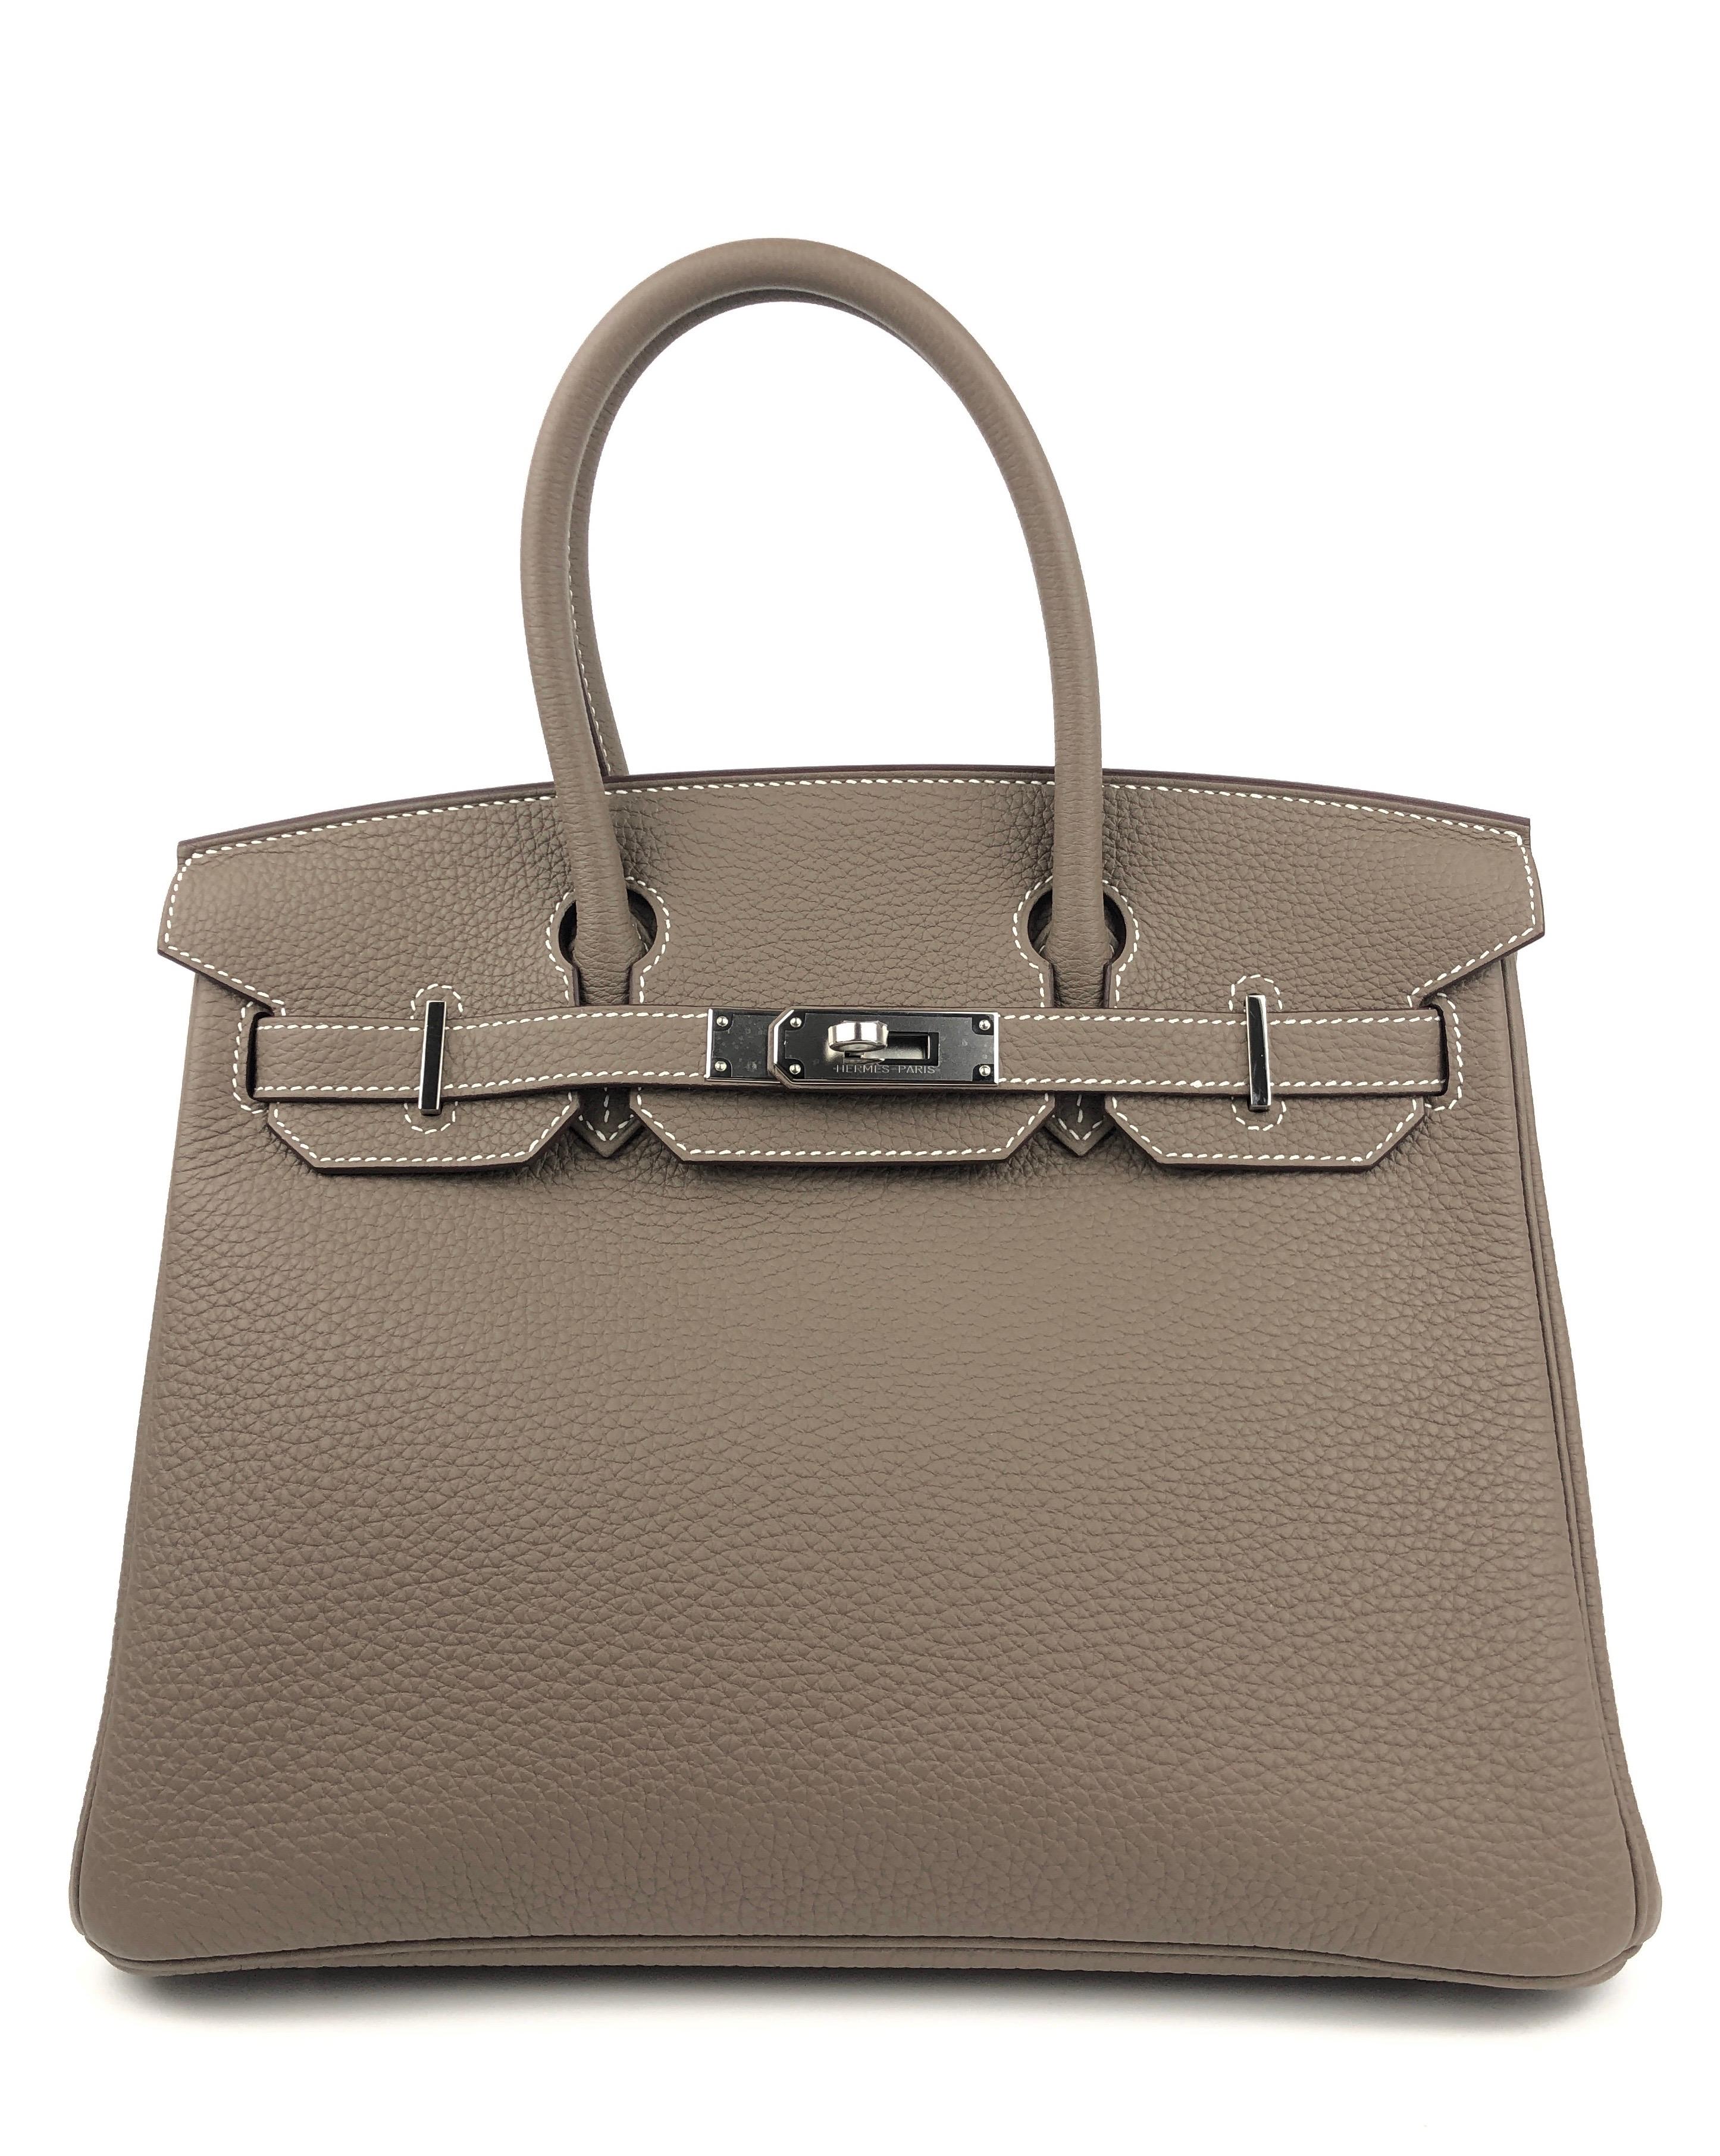 NEW 2021 Stunning Hermes Birkin 30 Etoupe Palladium Hardware. Z Stamp 2021.

Shop with Confidence from Lux Addicts. Authenticity Guaranteed! 